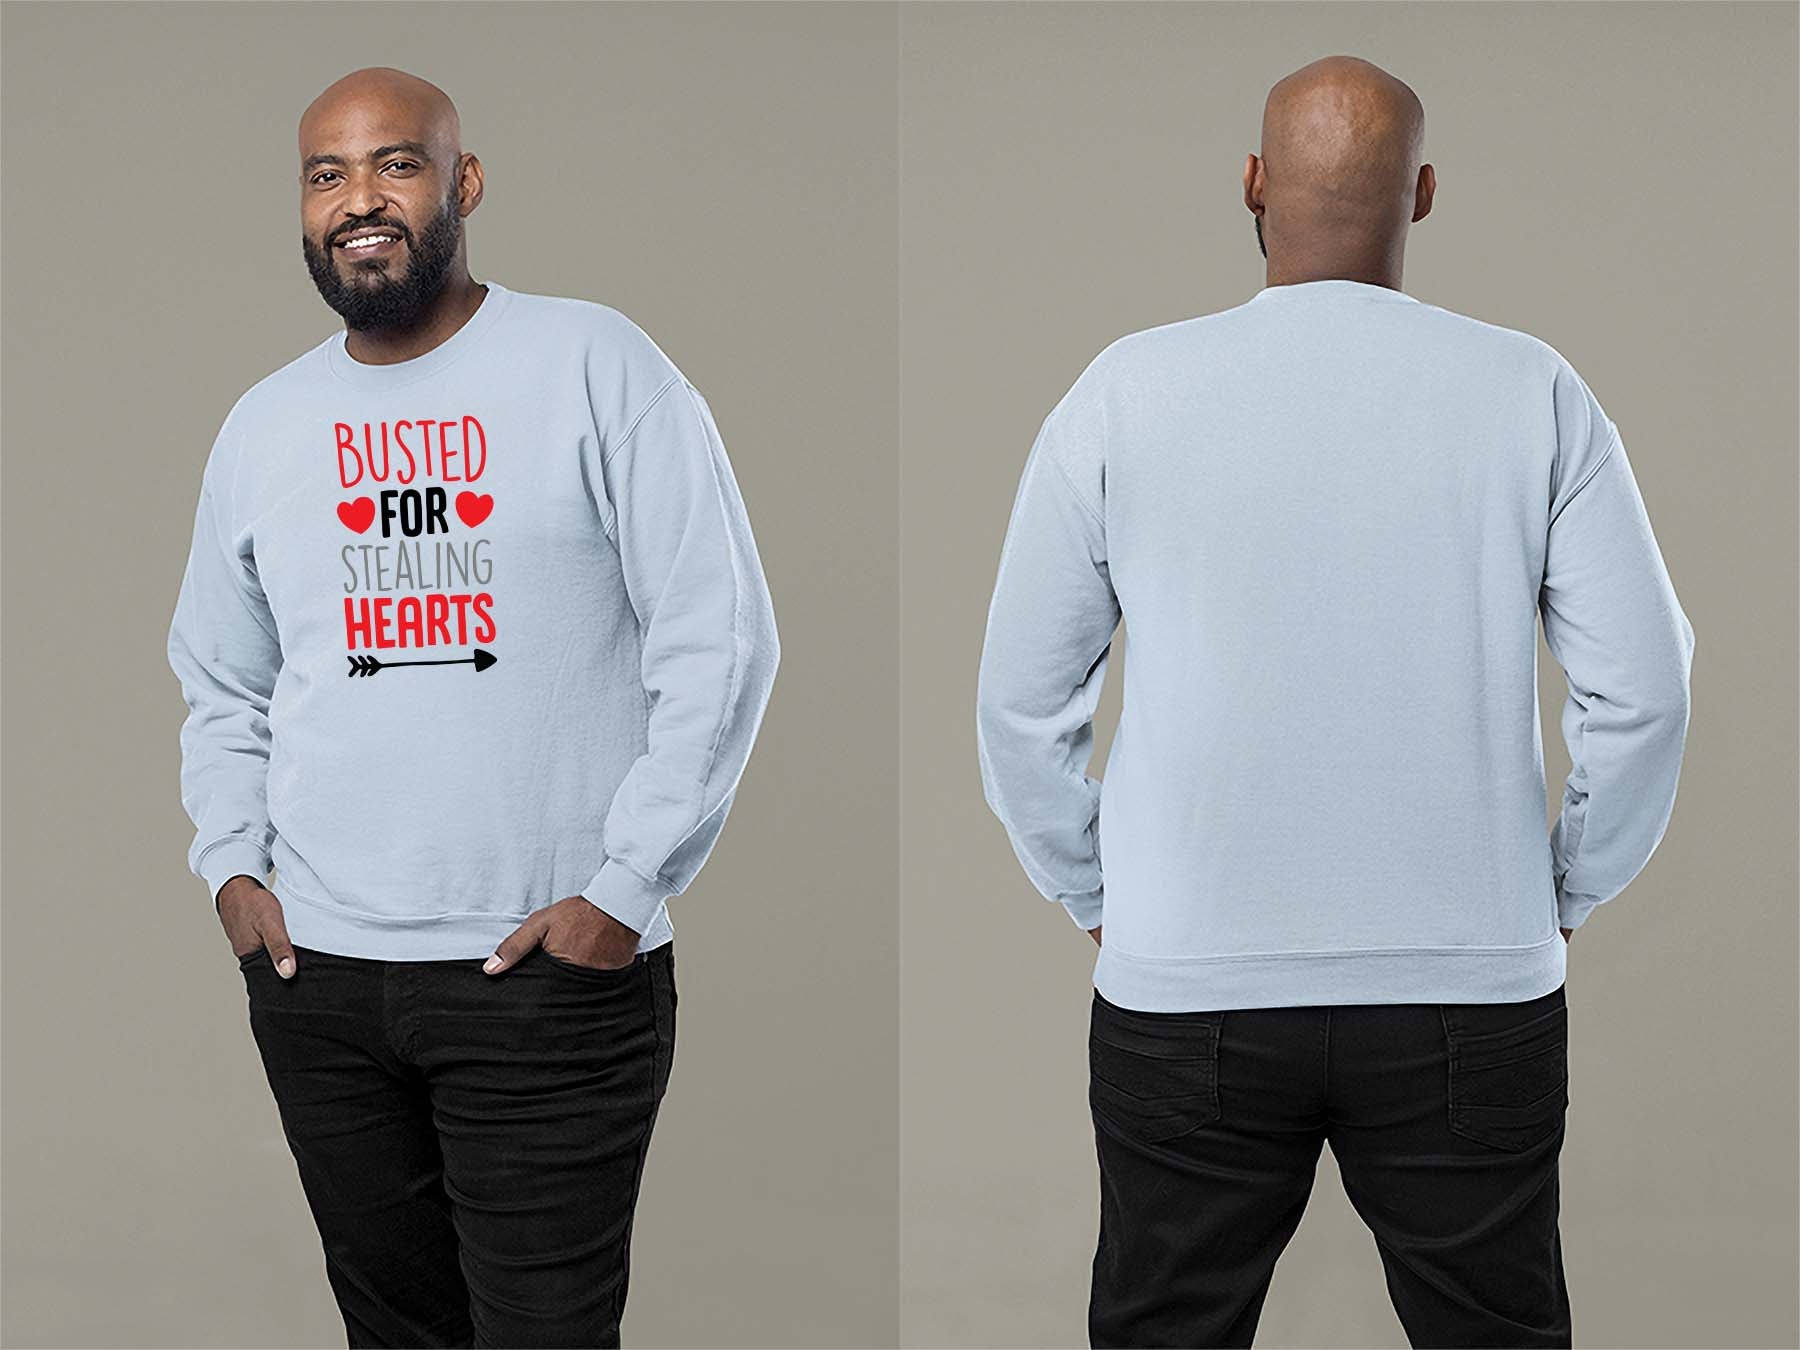 Fat Dave Busted For Stealing Hearts Sweatshirt Small Light Blue